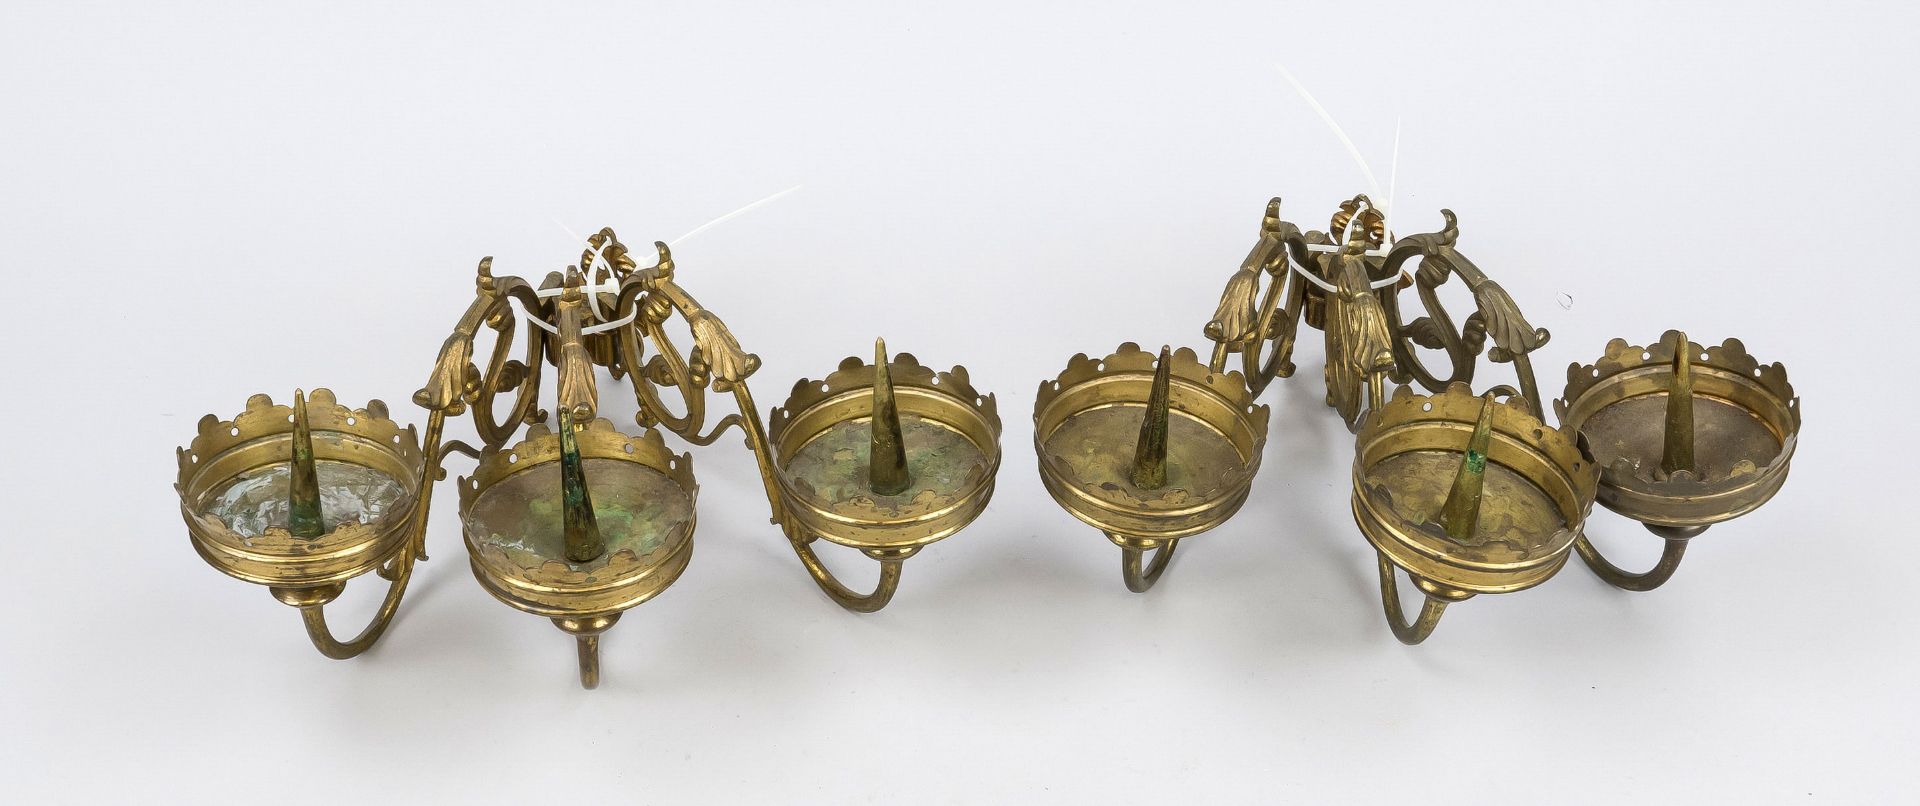 2 sconces, each with 3 flames, 19th century, brass. Swivel arms with acanthus leaf decoration